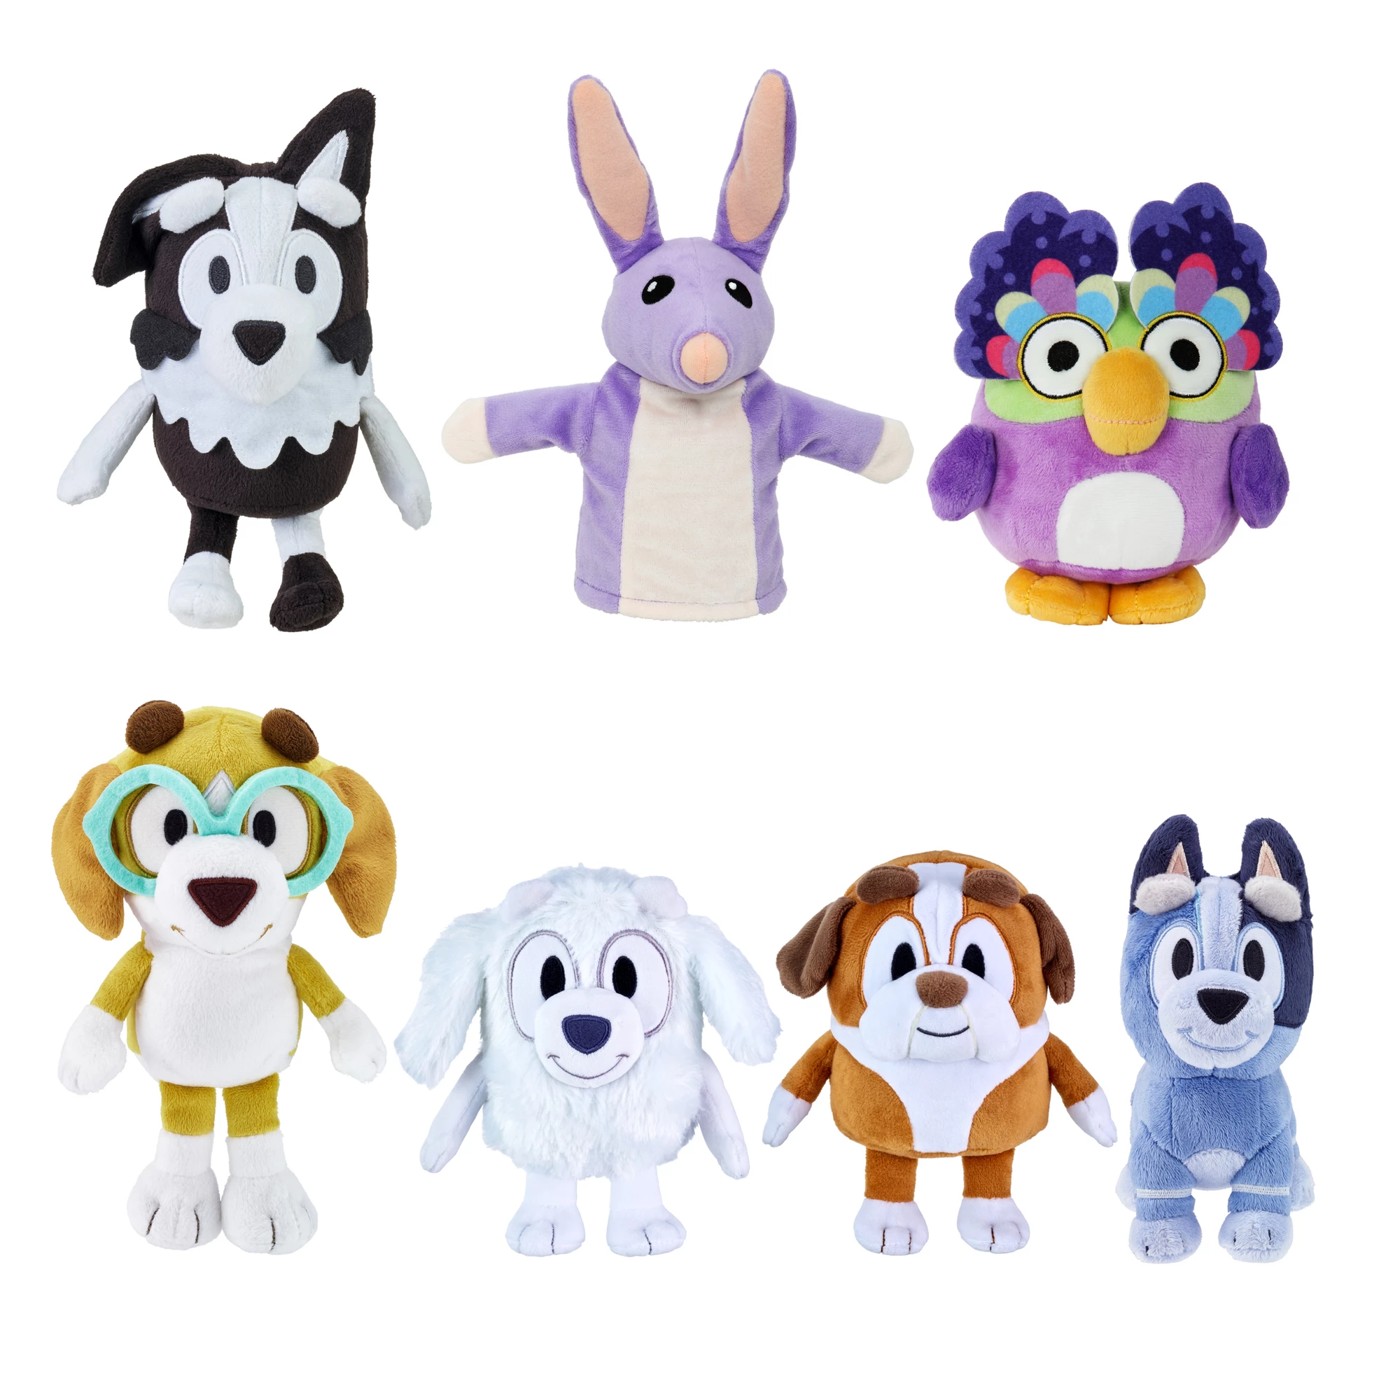 Small Plush Stuffed Animal Toys, Assorted, Ages 3+